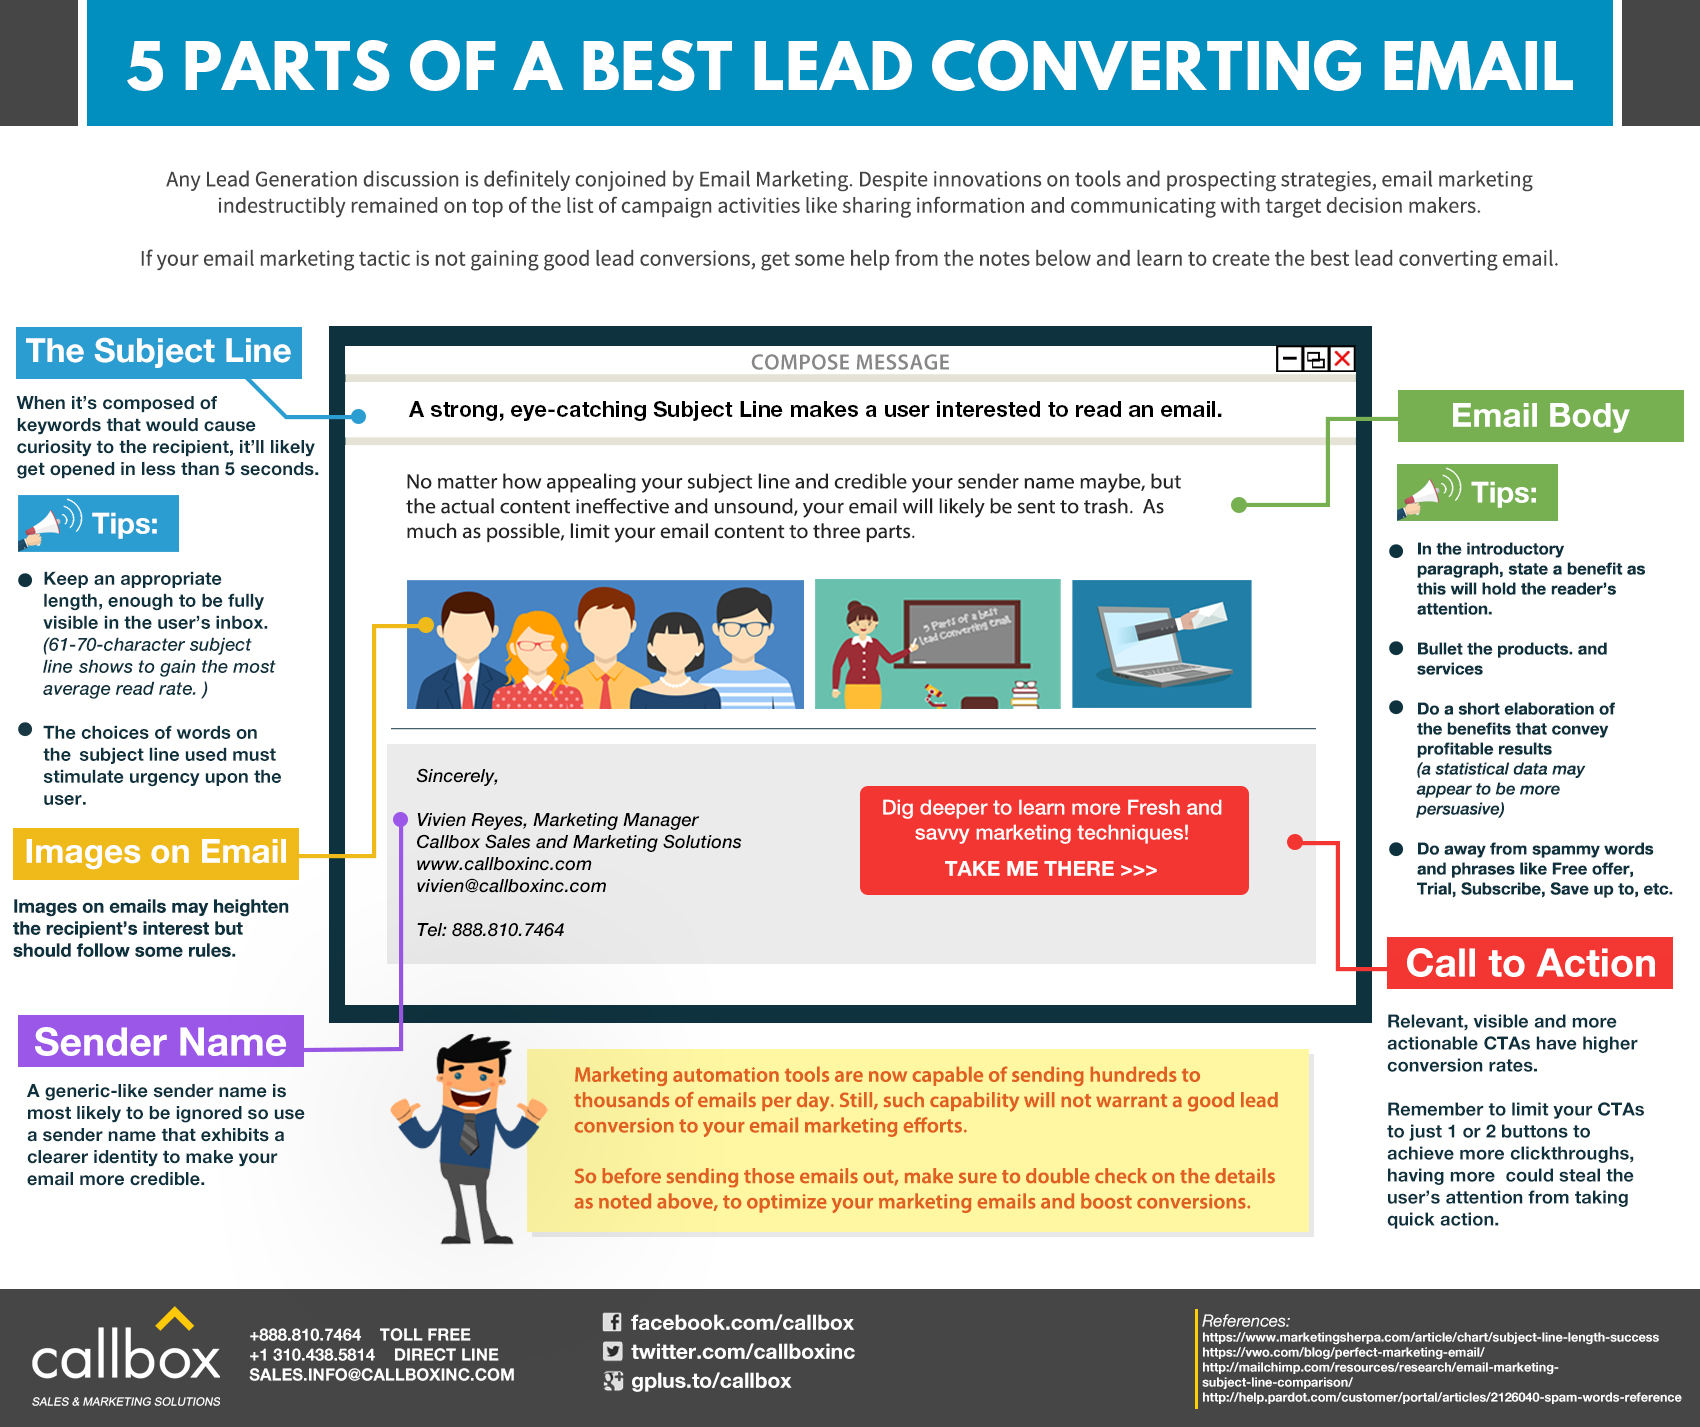 5 Parts of a Best Lead Converting Email